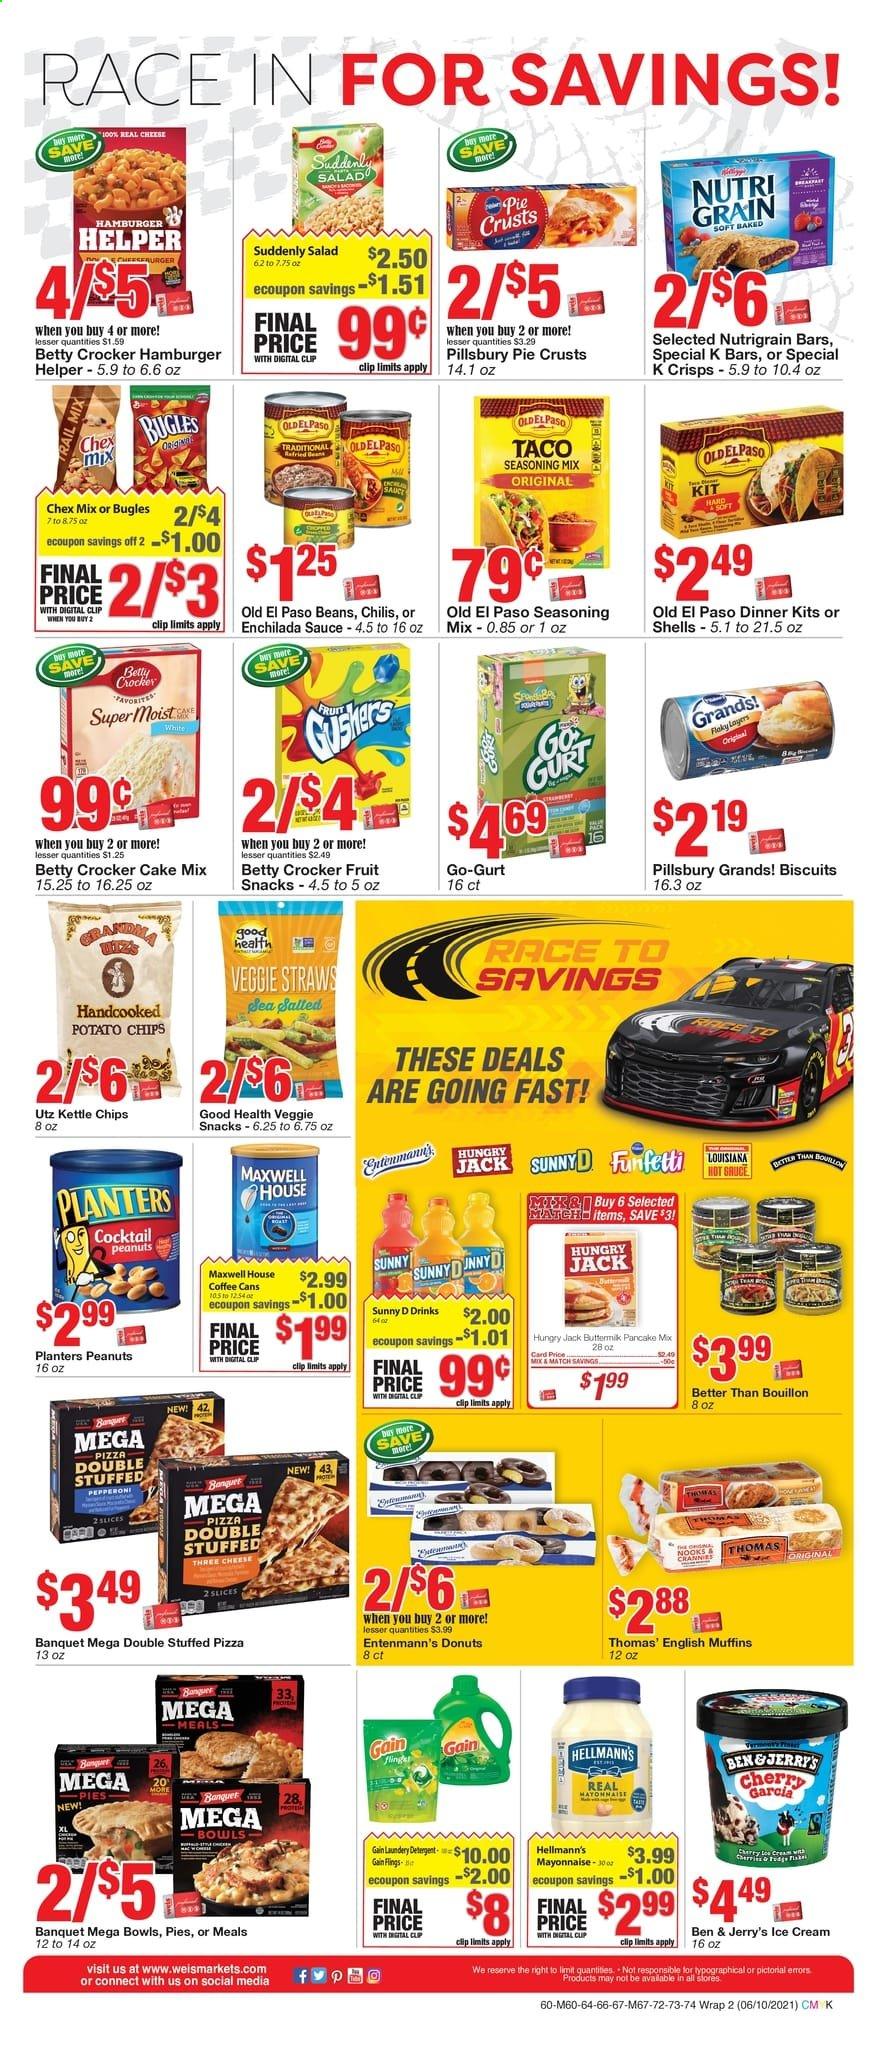 thumbnail - Weis Flyer - 06/10/2021 - 07/15/2021 - Sales products - english muffins, pie, Old El Paso, donut, Entenmann's, cake mix, salad, pizza, sauce, pancakes, Pillsbury, dinner kit, mayonnaise, Hellmann’s, ice cream, Ben & Jerry's, biscuit, fruit snack, potato chips, chips, veggie straws, Chex Mix, bouillon, pie crust, enchilada sauce, Nutri-Grain, spice, hot sauce, peanuts, Planters, Maxwell House, coffee, Gain, cup. Page 12.